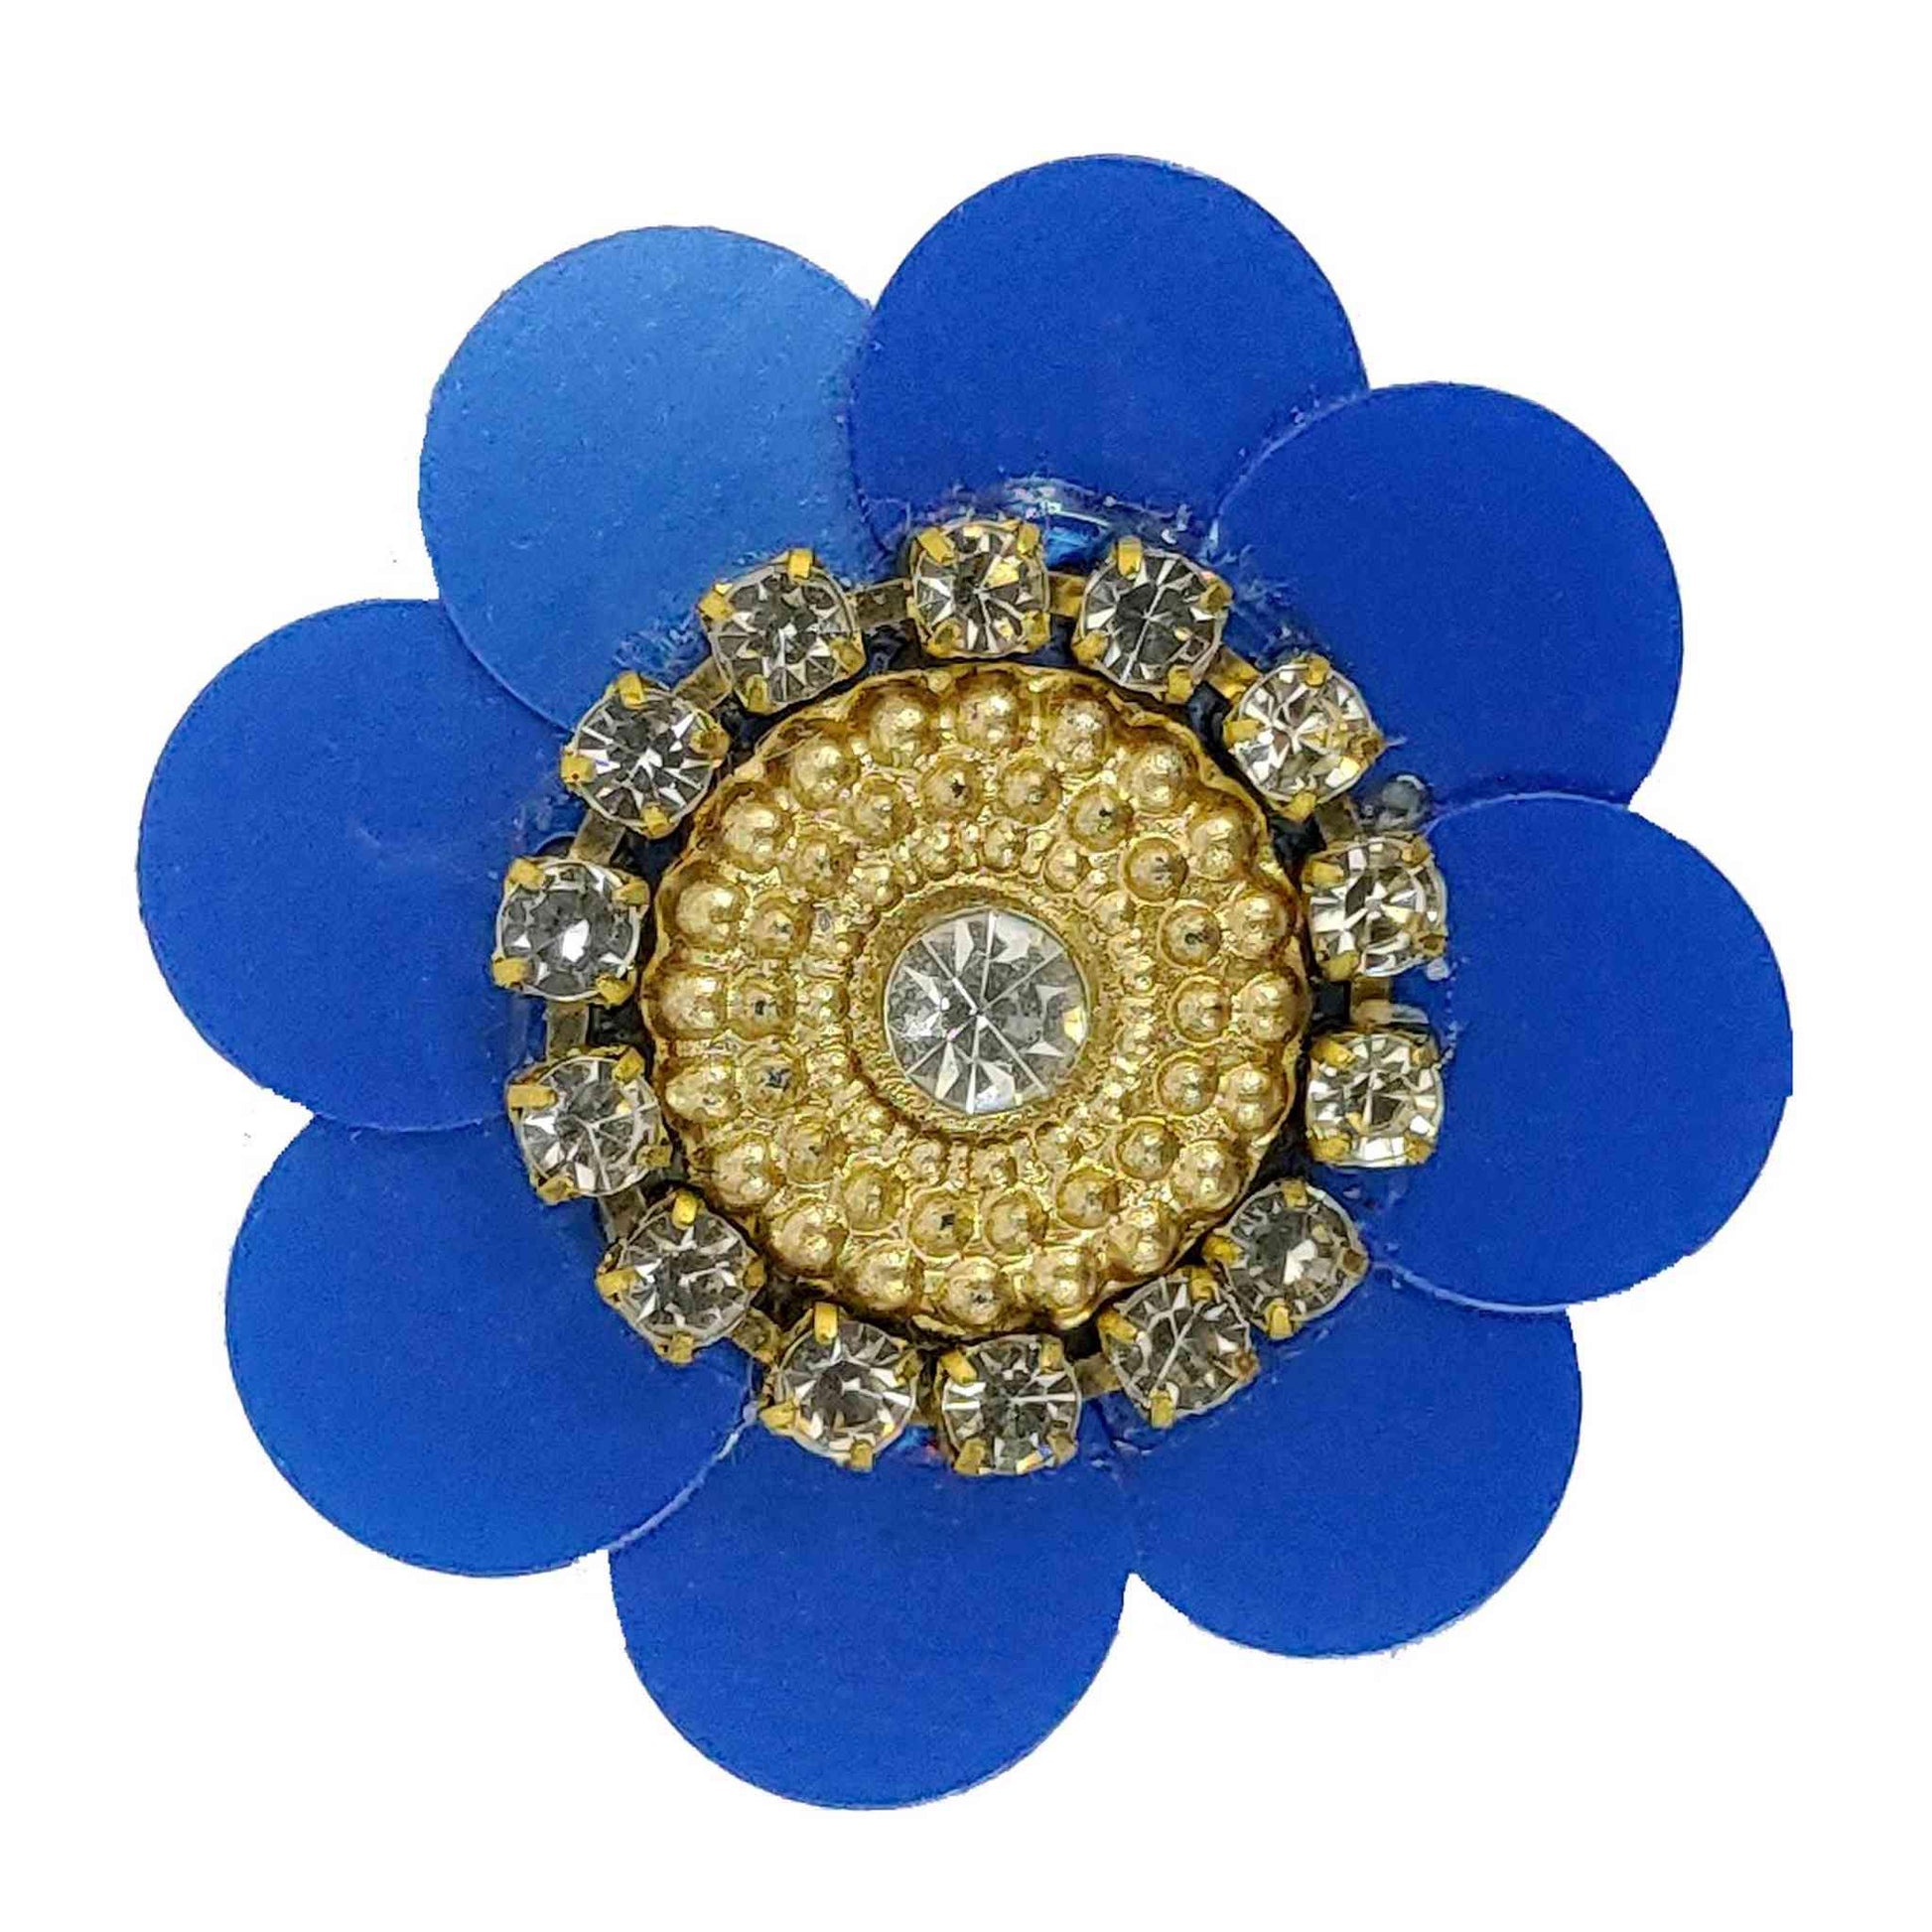 Indian Petals Sequence work Floral Buti for DIY Craft, Trouseau Packing or Decoration (Bunch of 12) - Design 206, Blue - Indian Petals